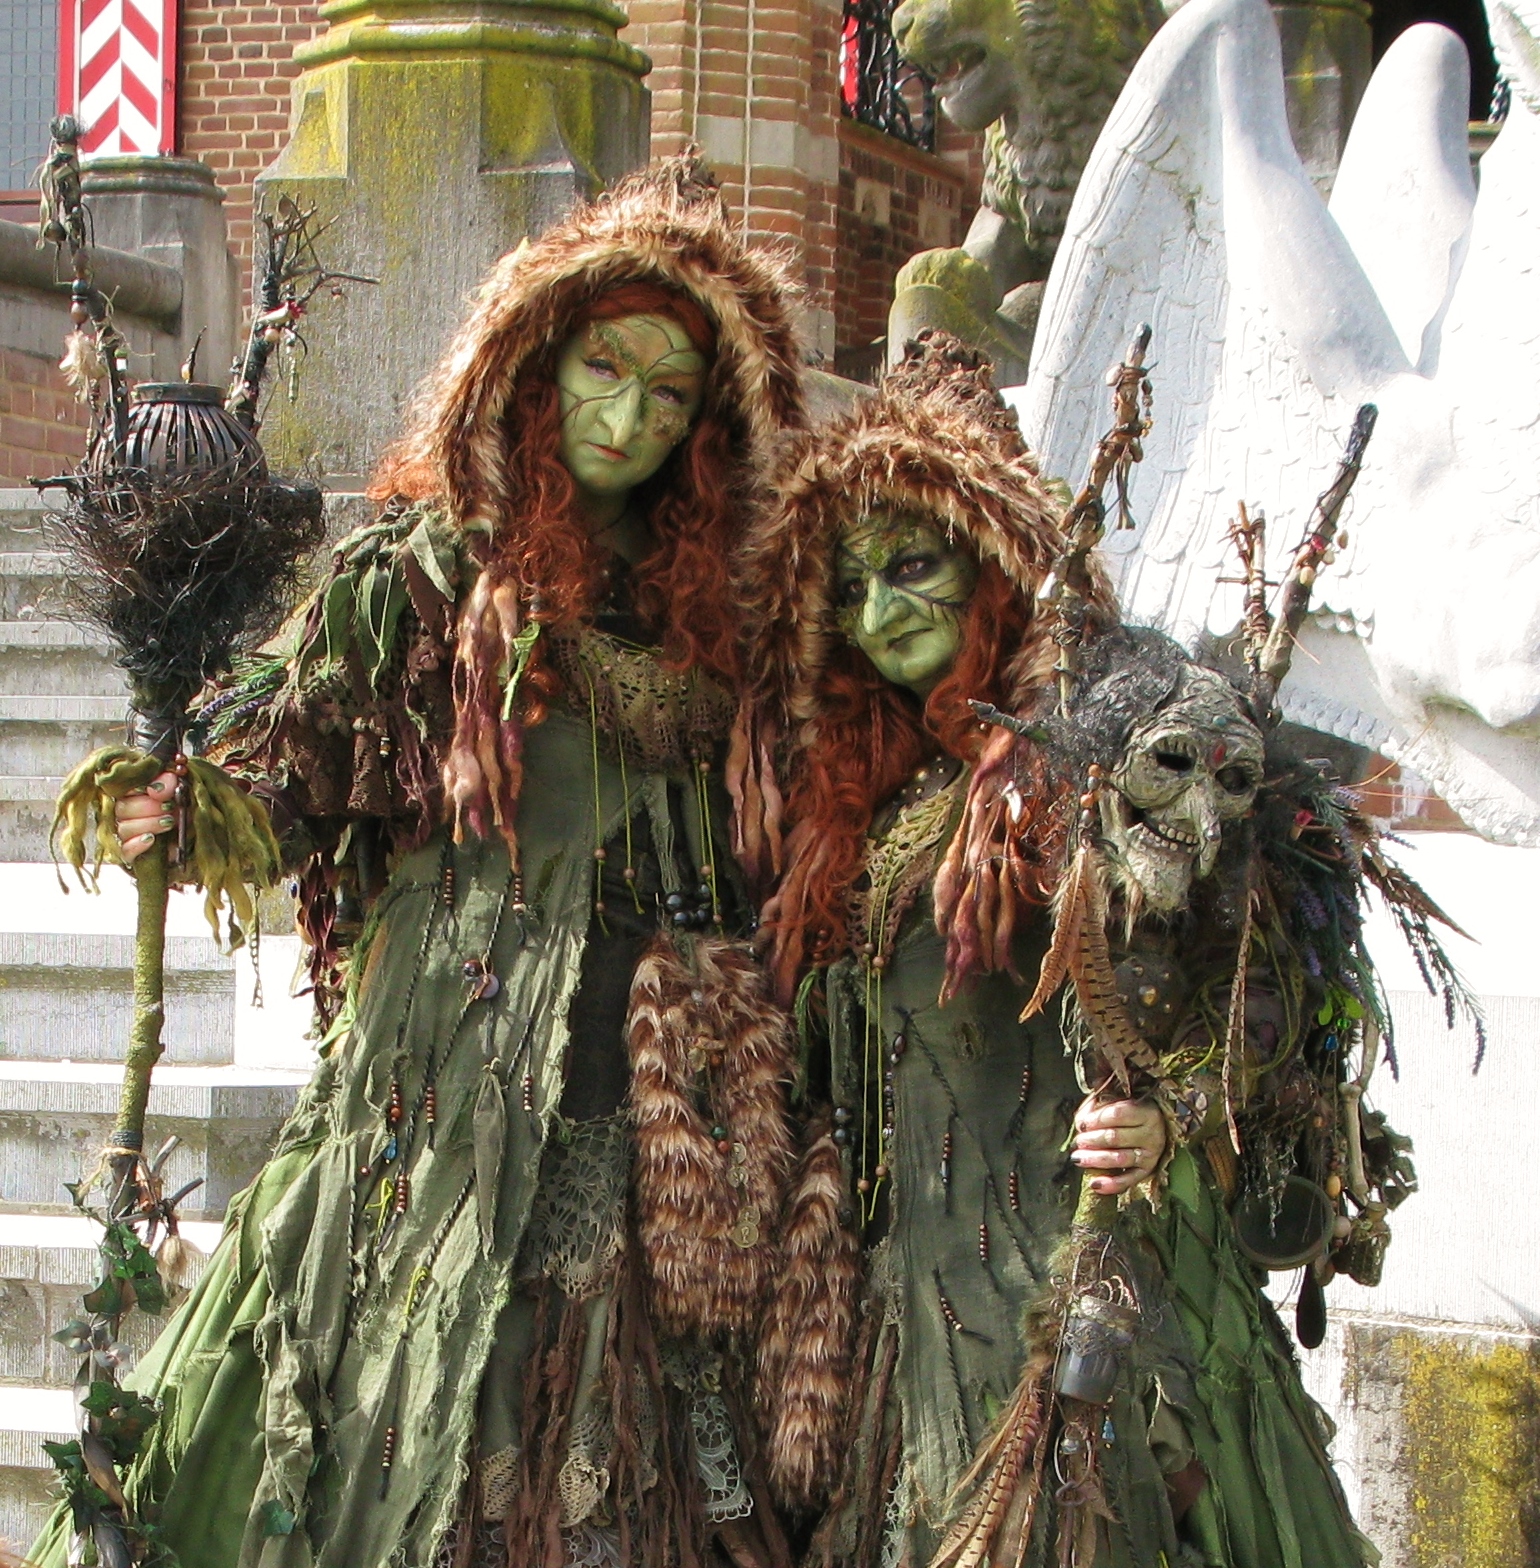 two male and female scare people dressed as plants